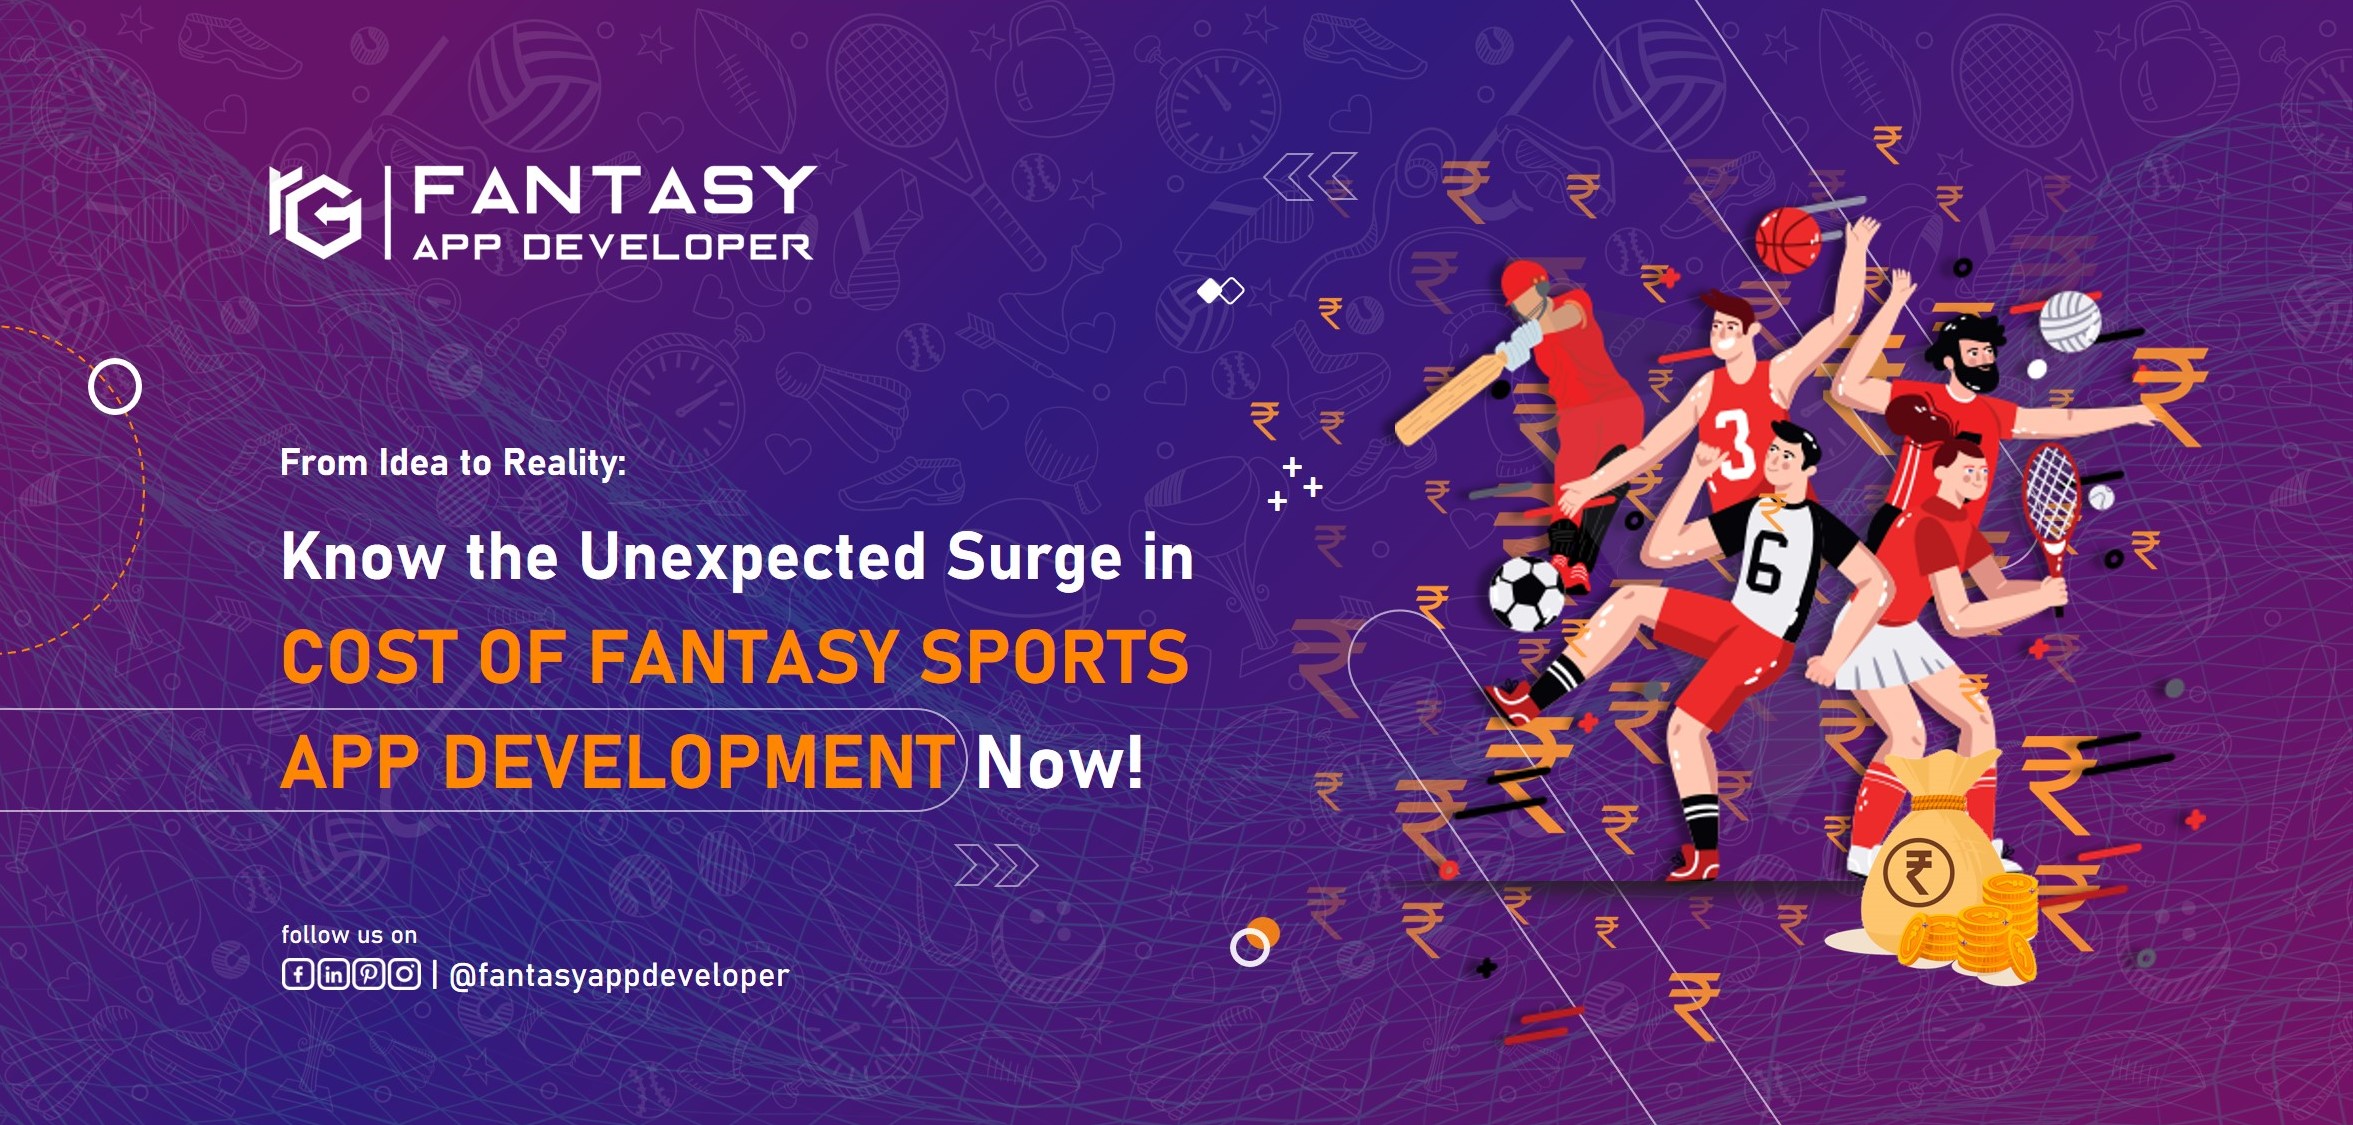 Know the Unexpected Surge in Cost of Fantasy Sports App!